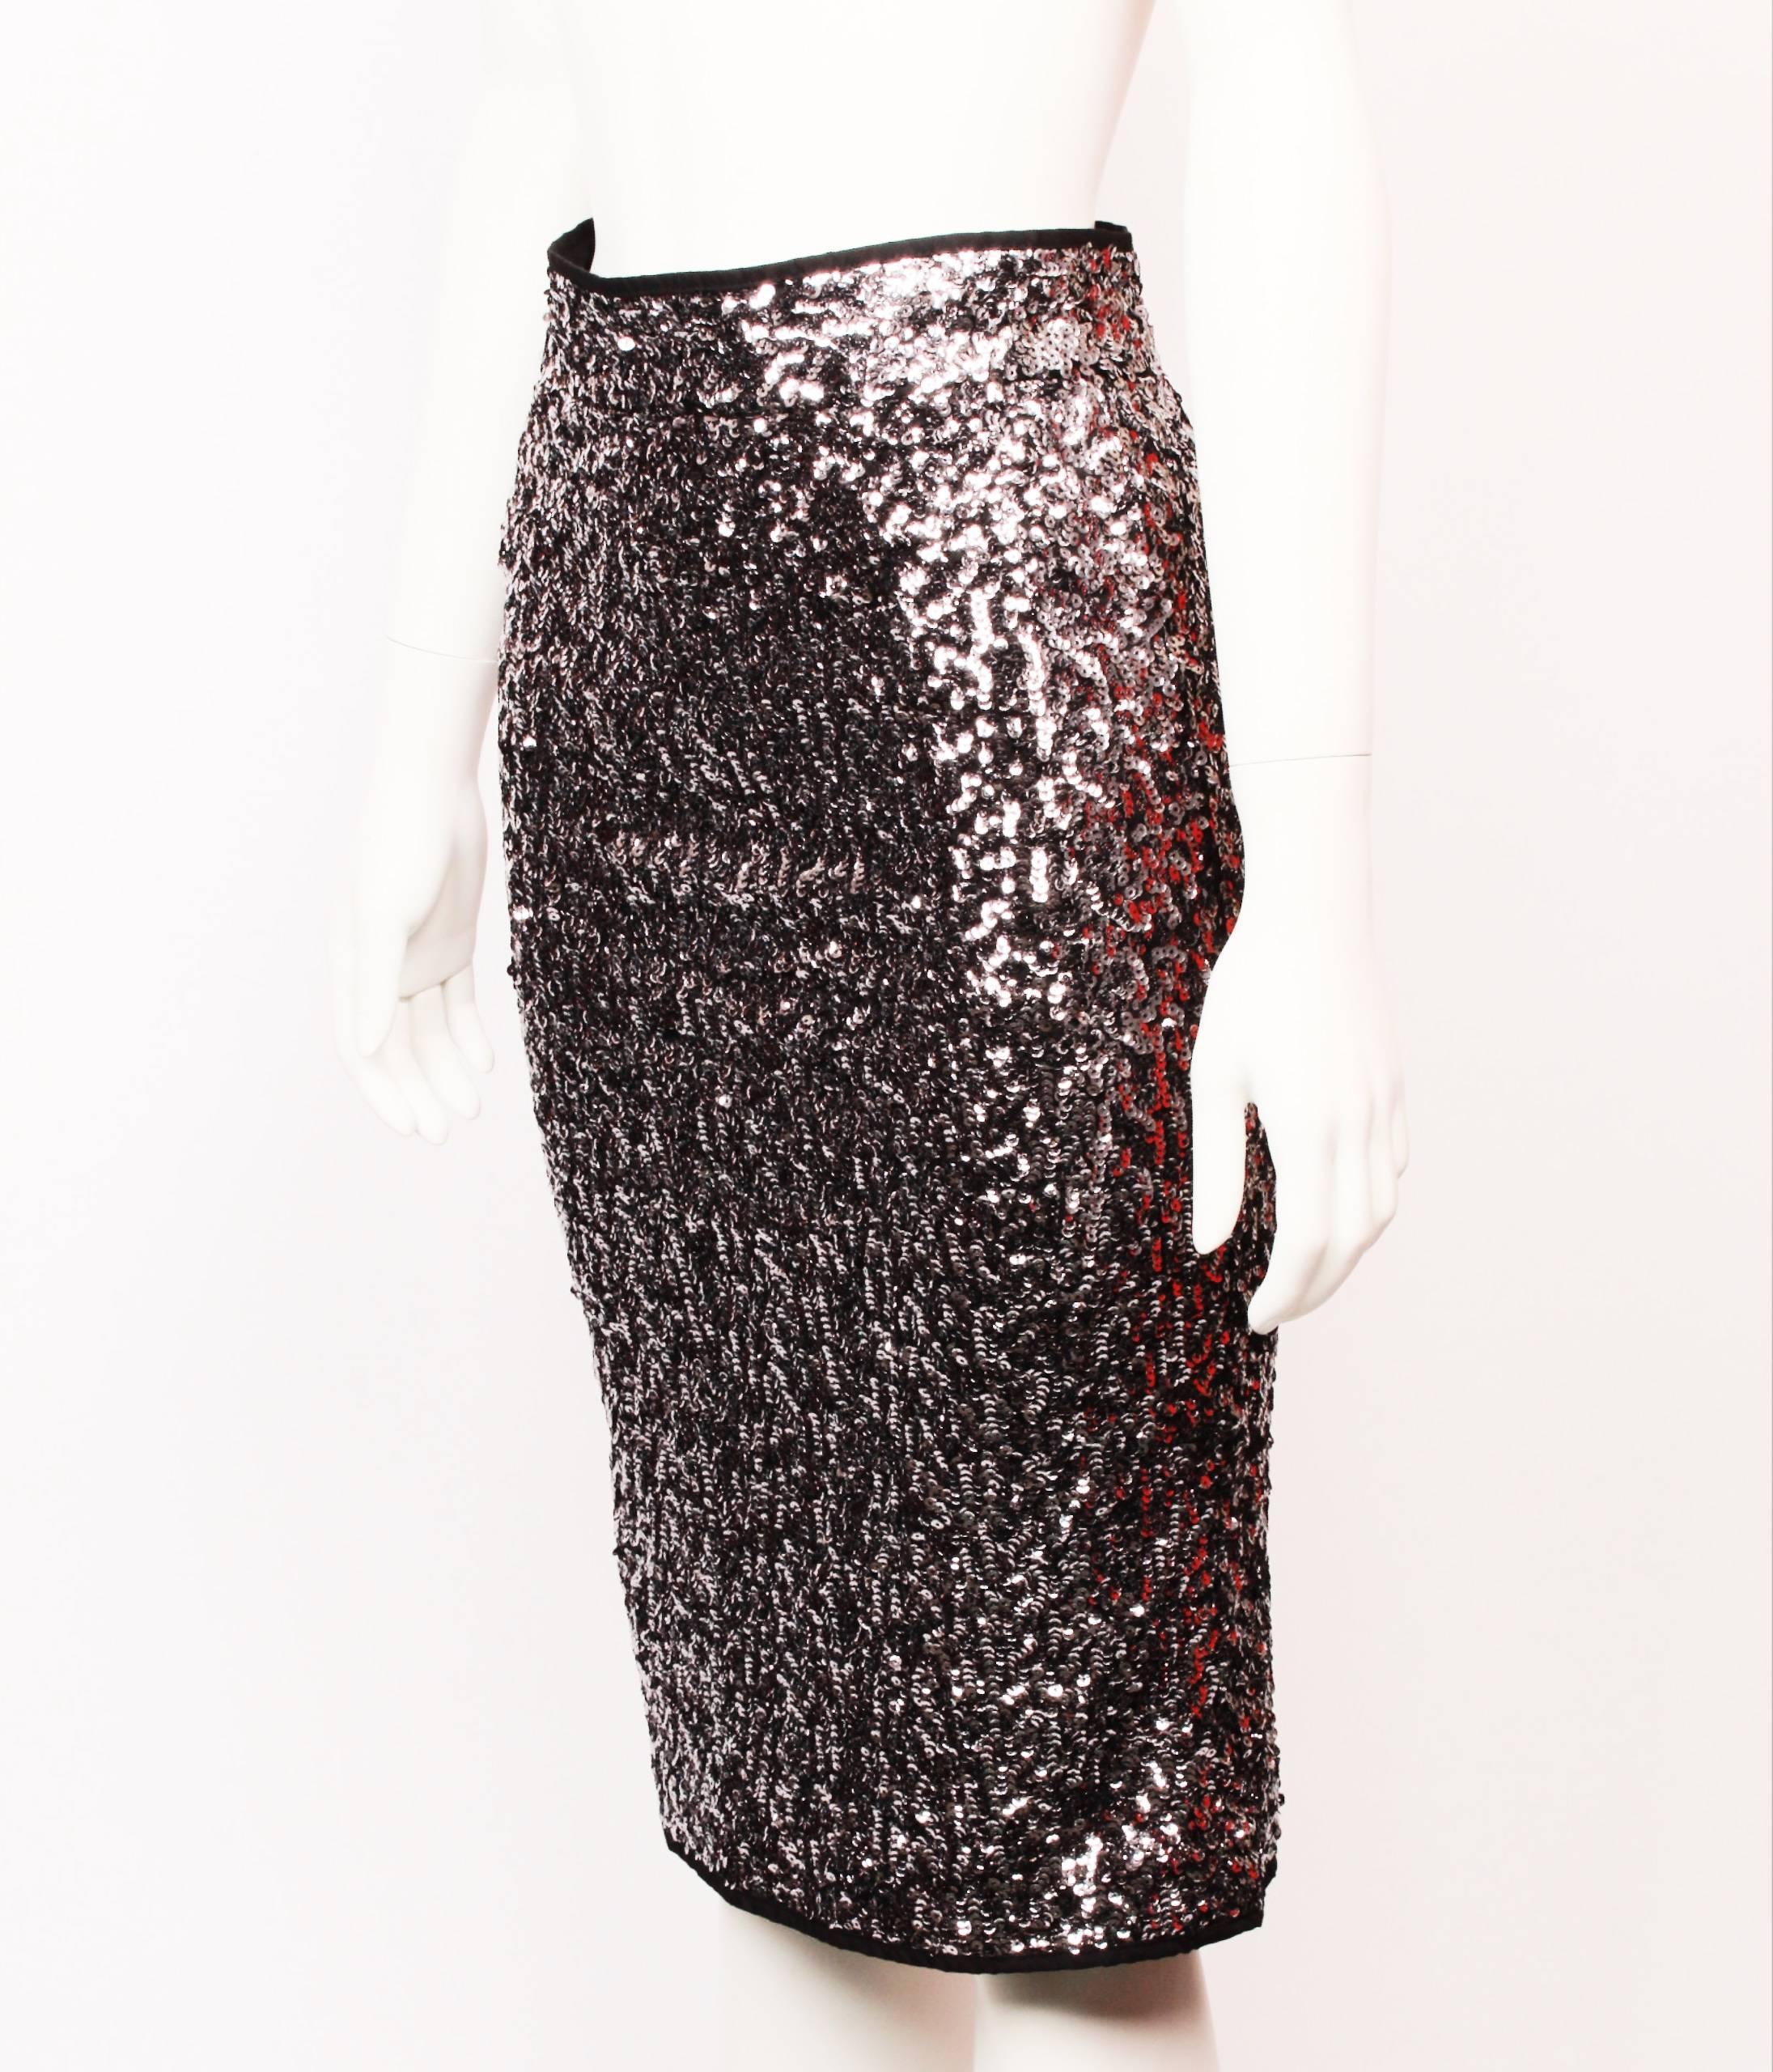 Alluring Karl Lagerfeld gunmetal grey sequin knee length fitted skirt. Features a waistband with hook and eye closure. Back split and invisible zipper. 